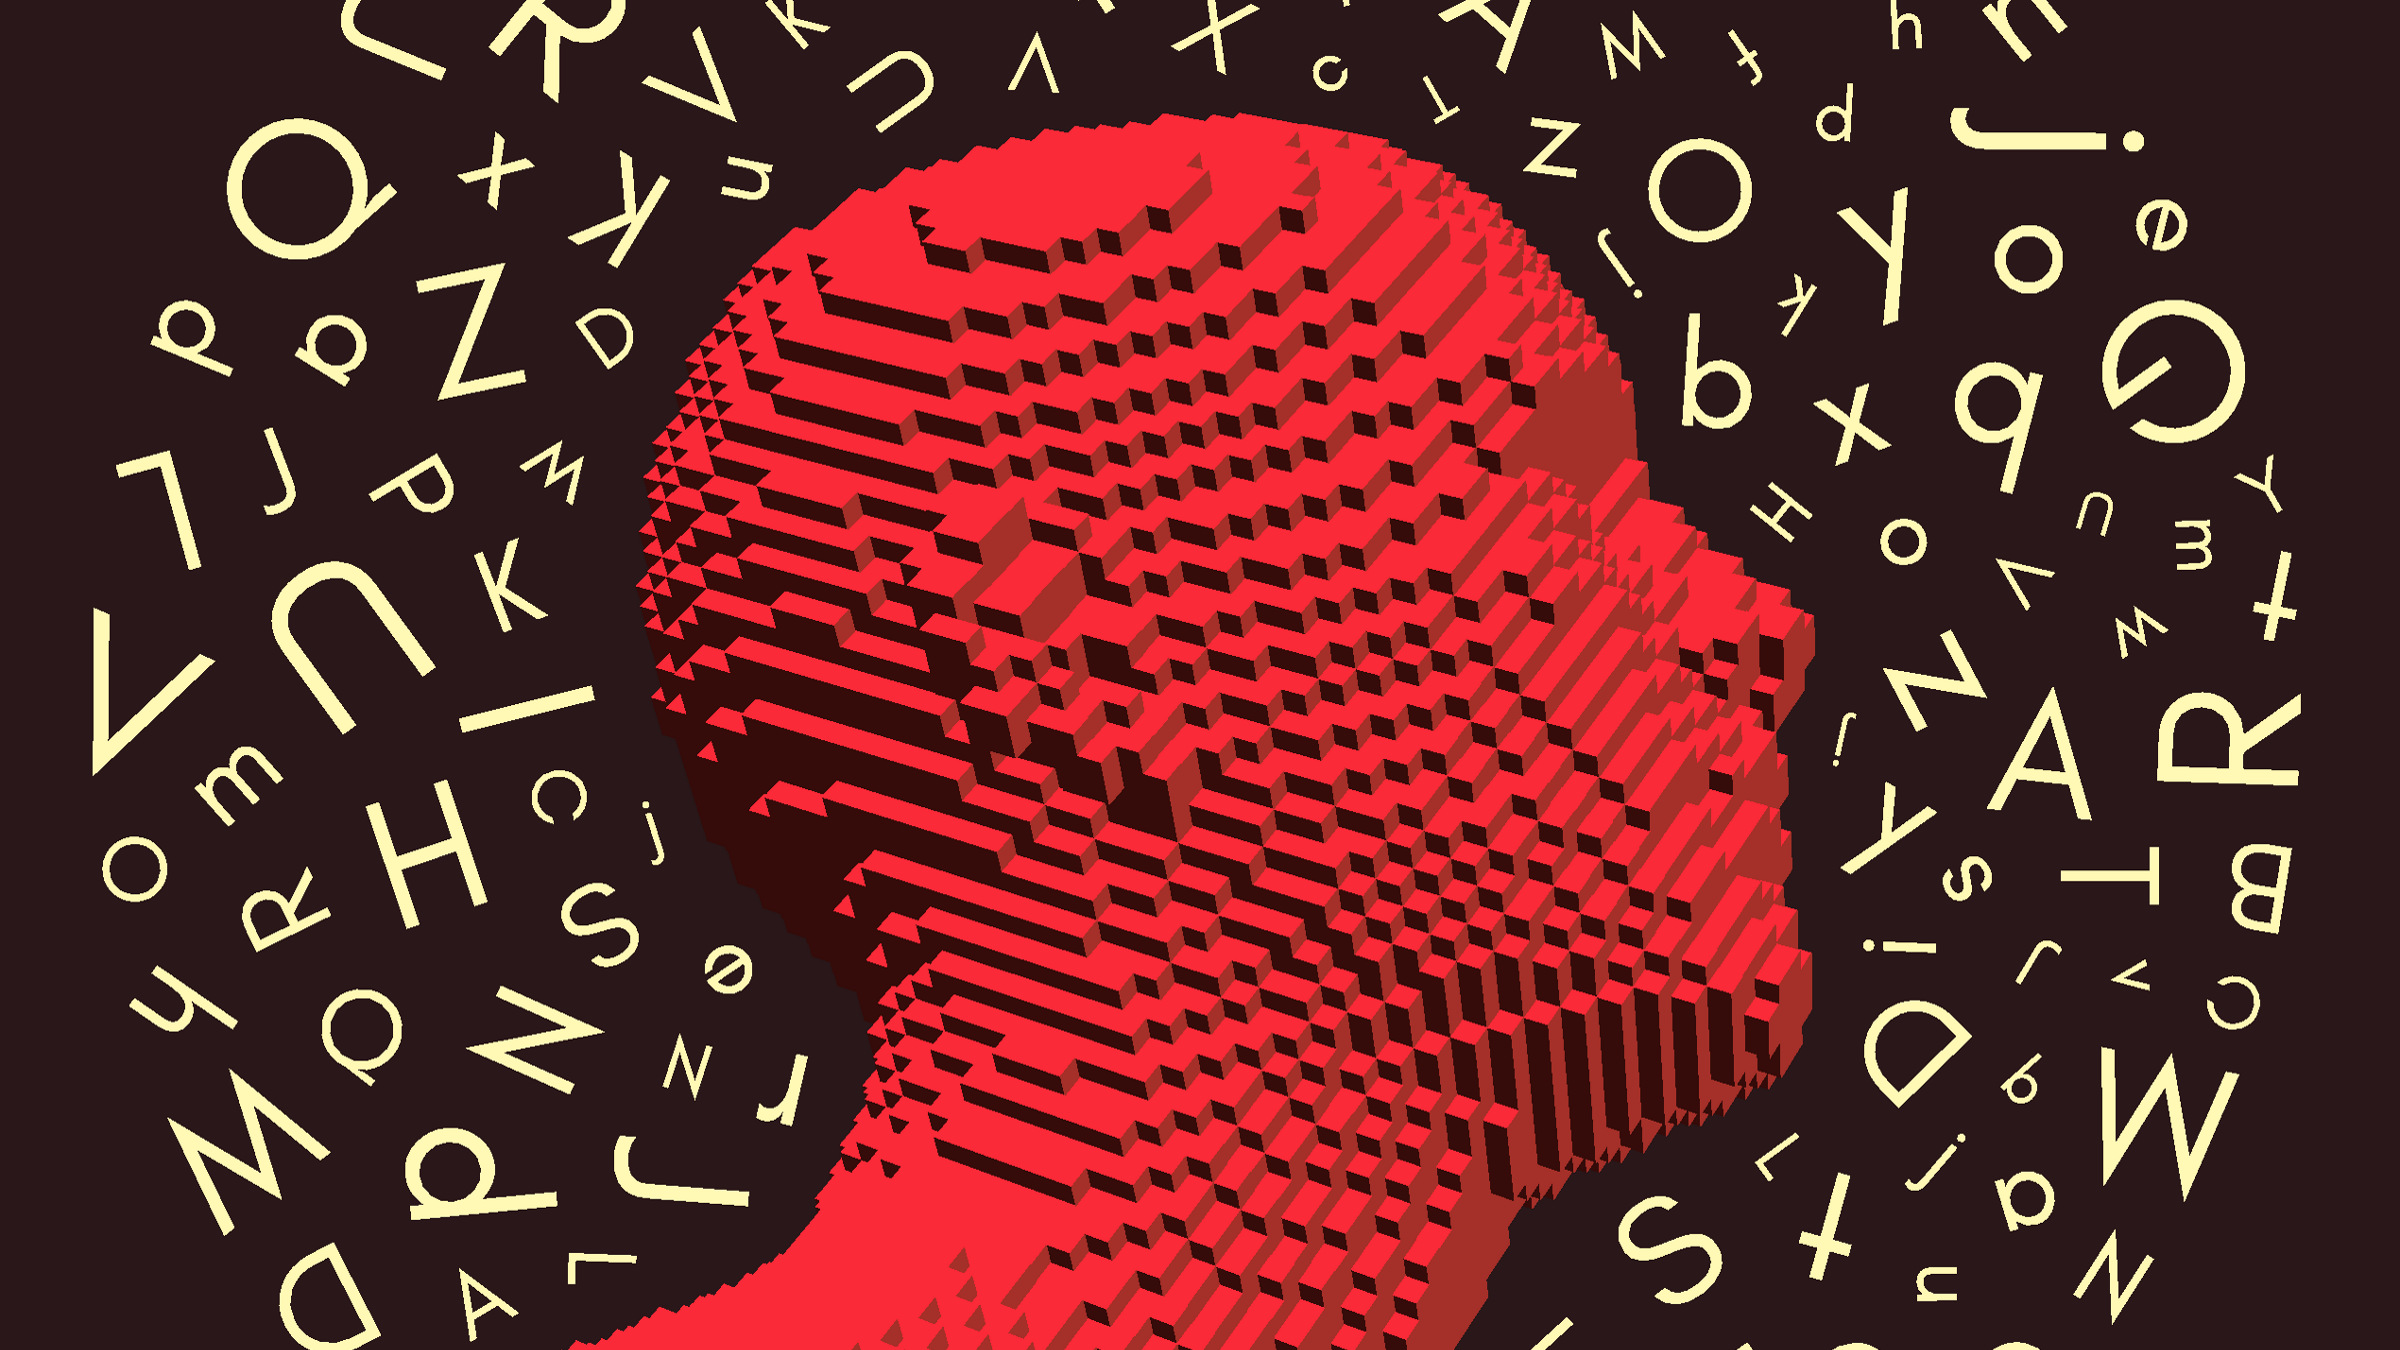 Credit: Shutterstock Letters surround a man's head, illustration